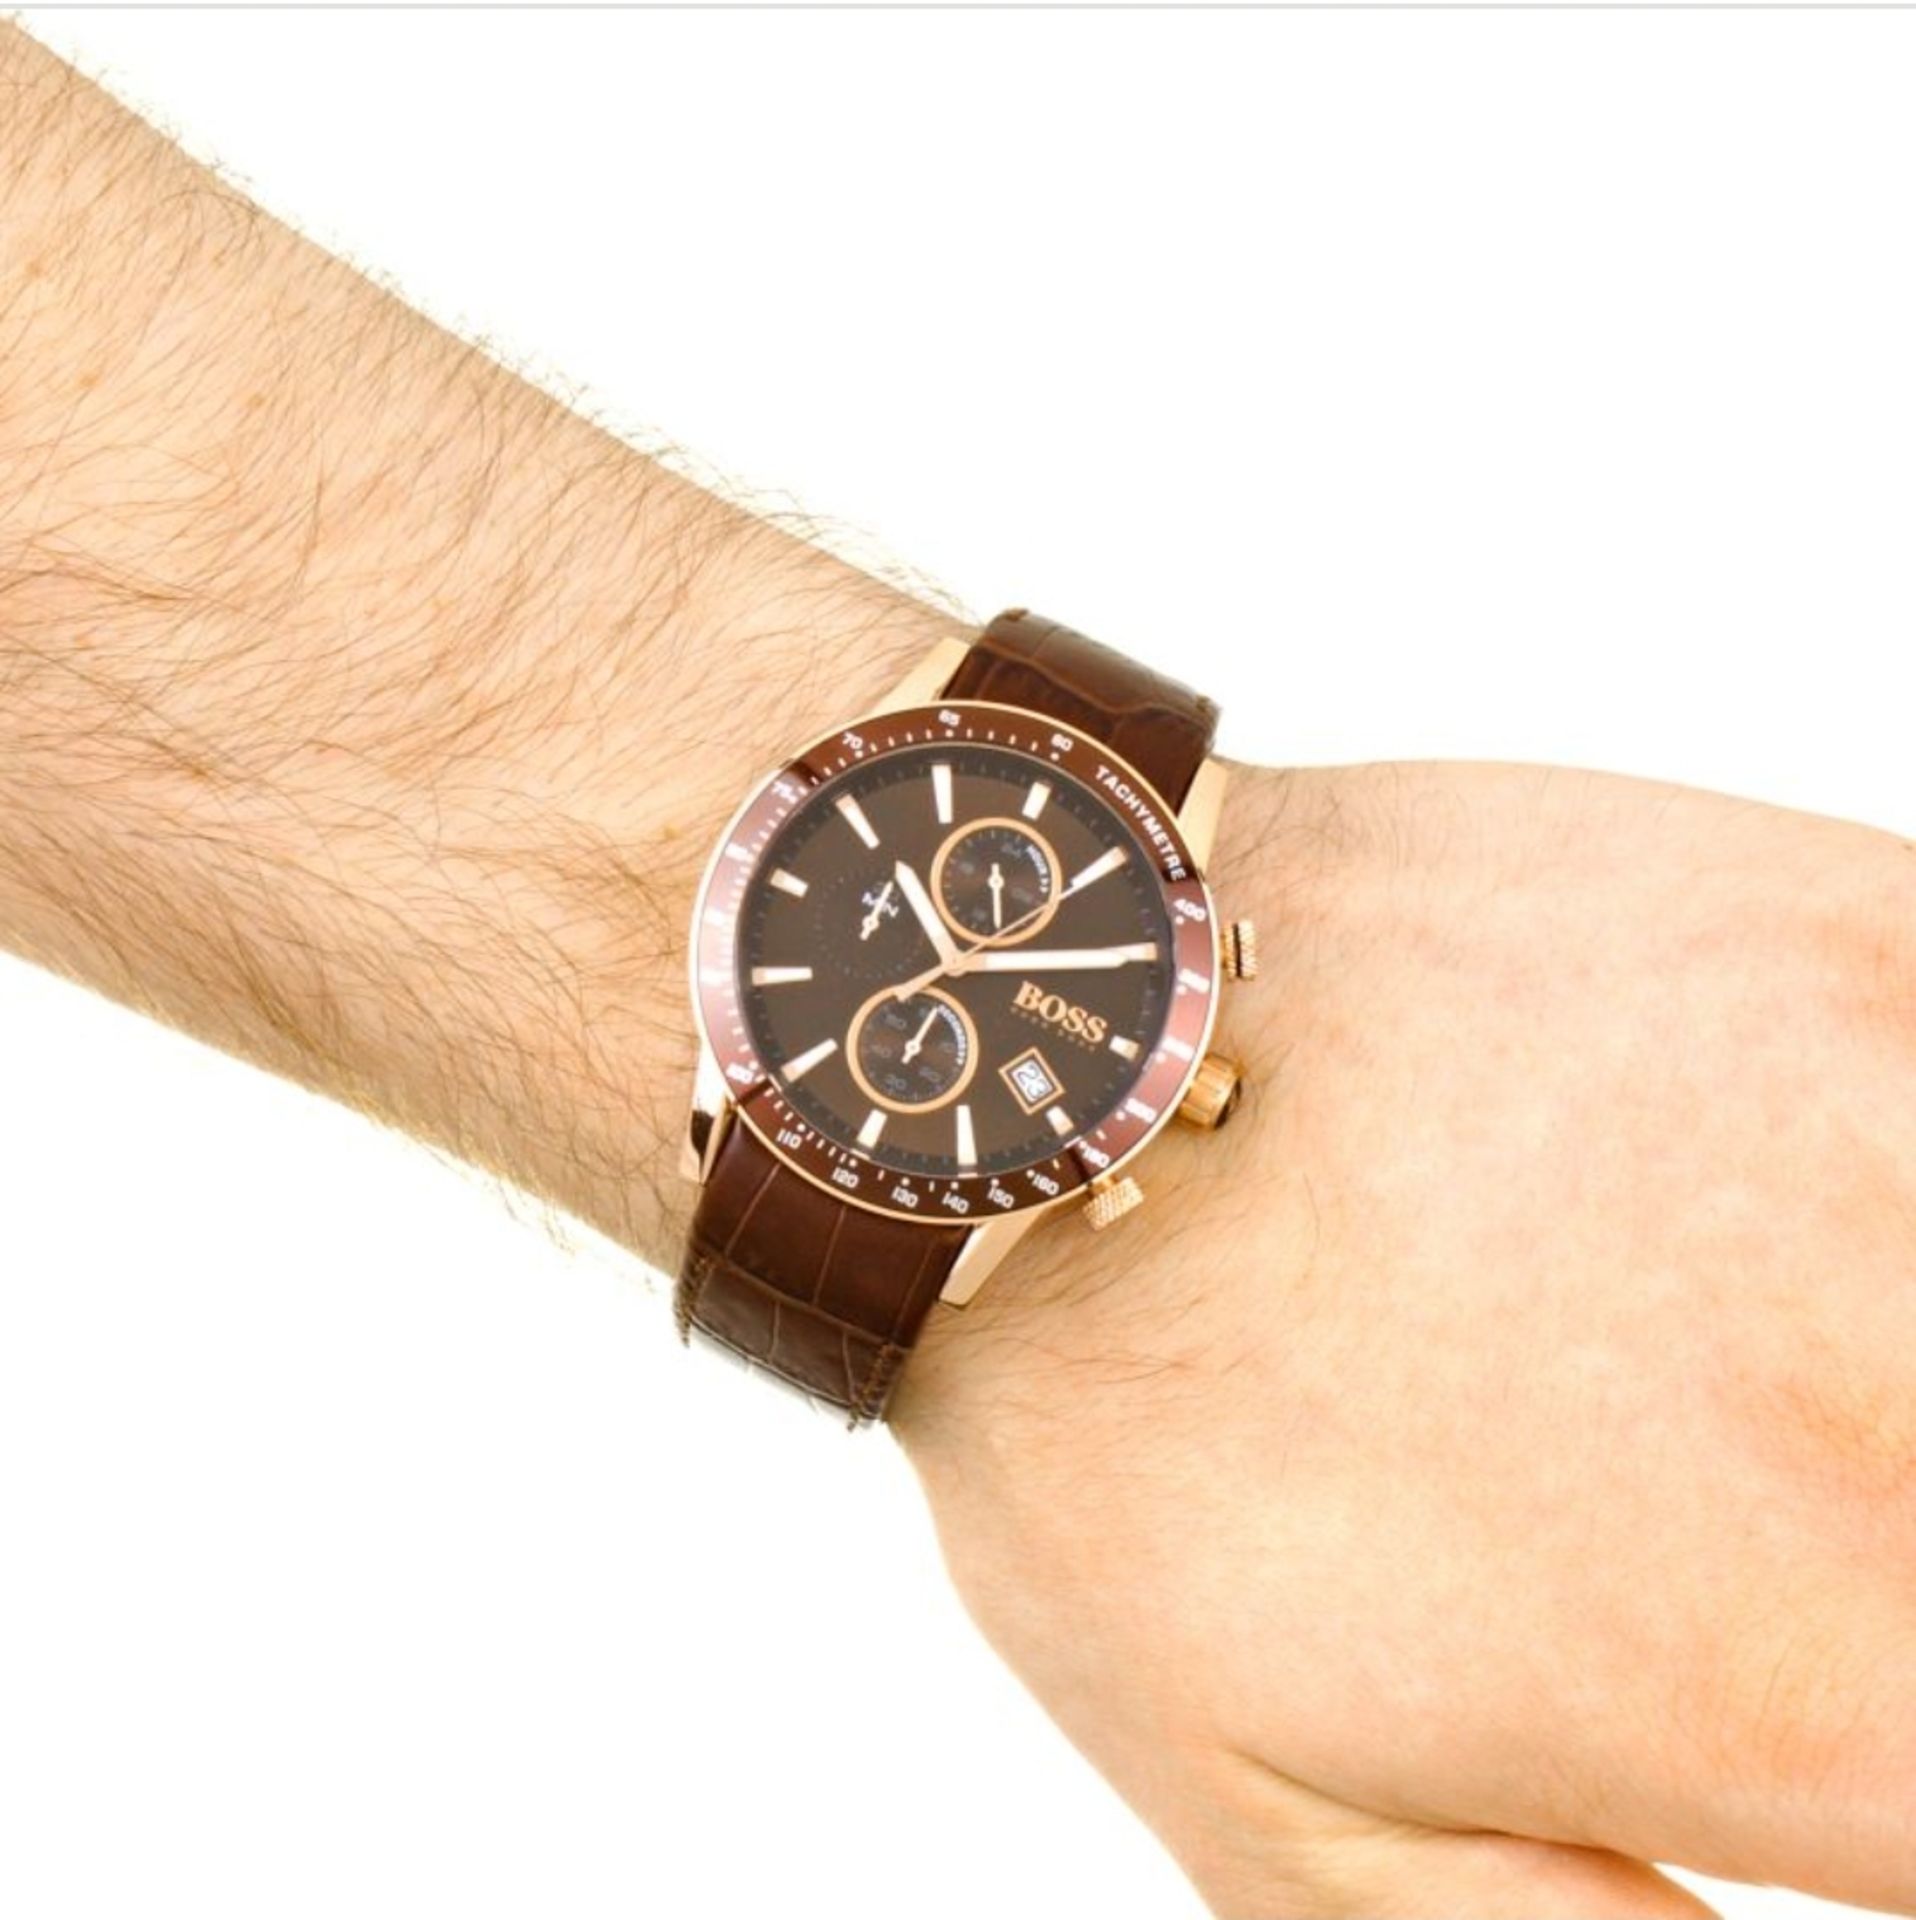 Hugo Boss 1513392 Men's Rafale Brown Leather Strap Chronograph Watch - Image 3 of 7